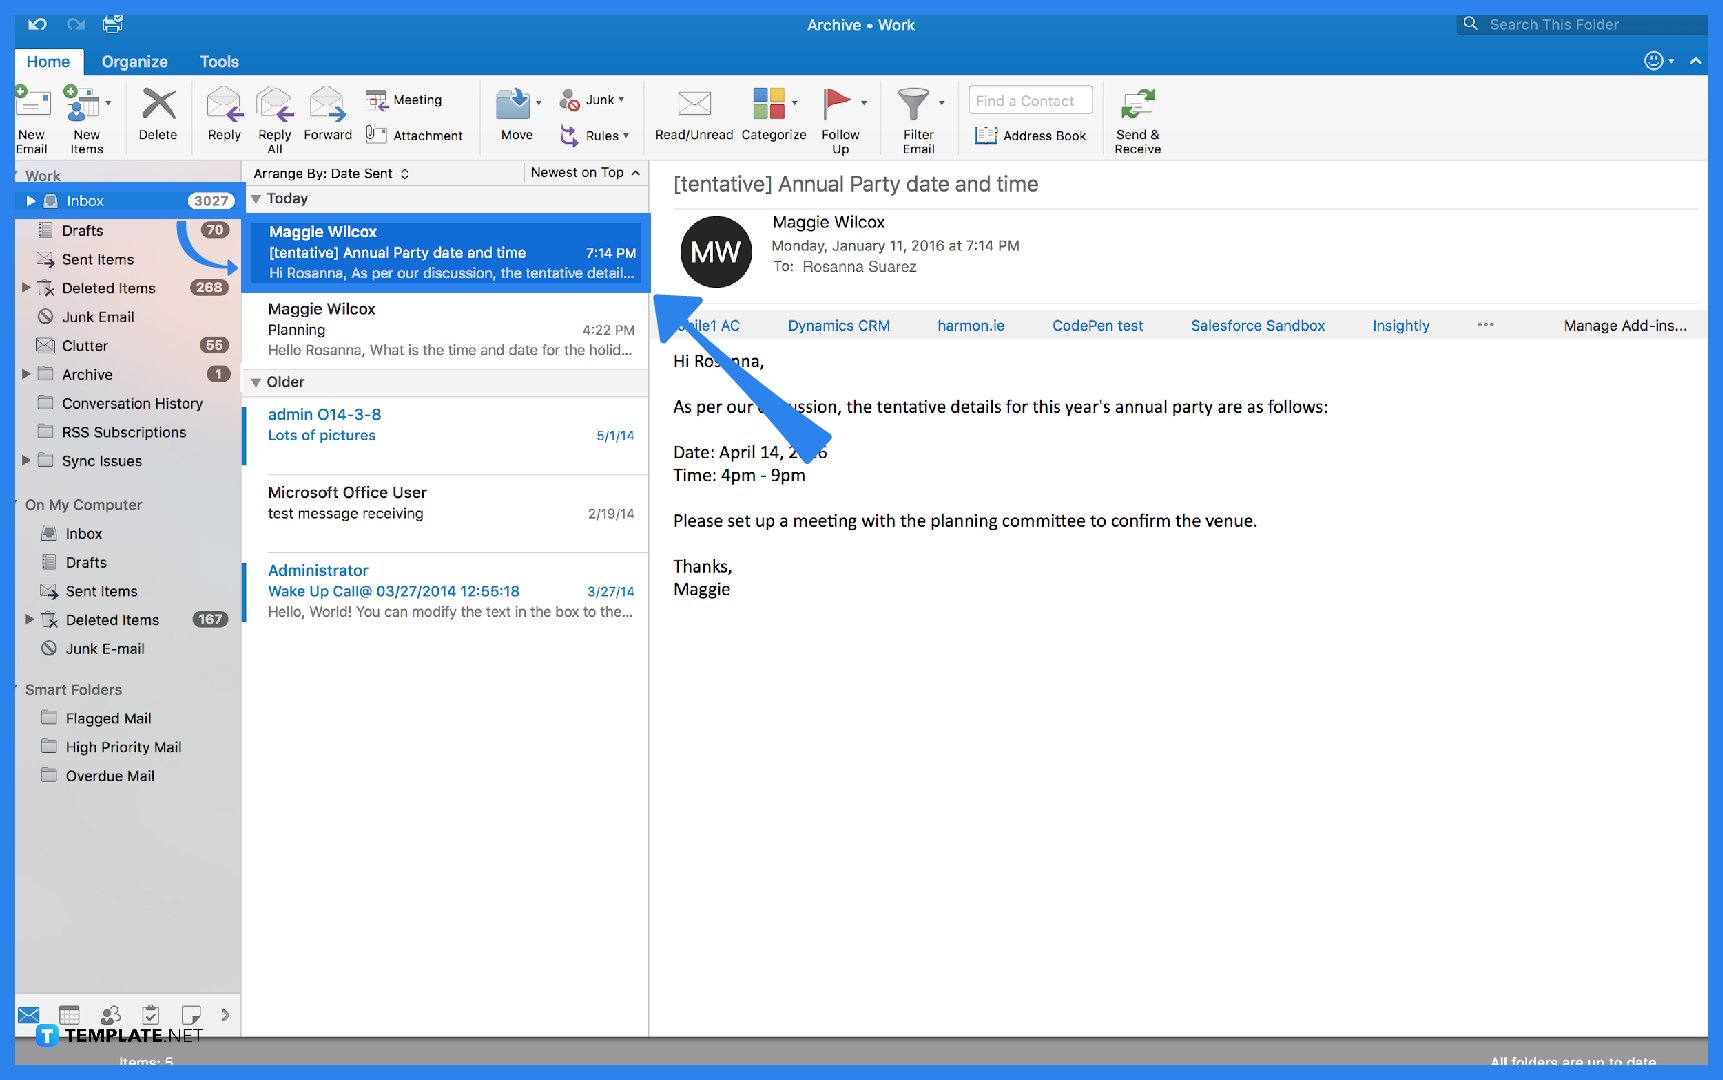 How to Move/Copy Emails from One Account to Another in Outlook - Step 1